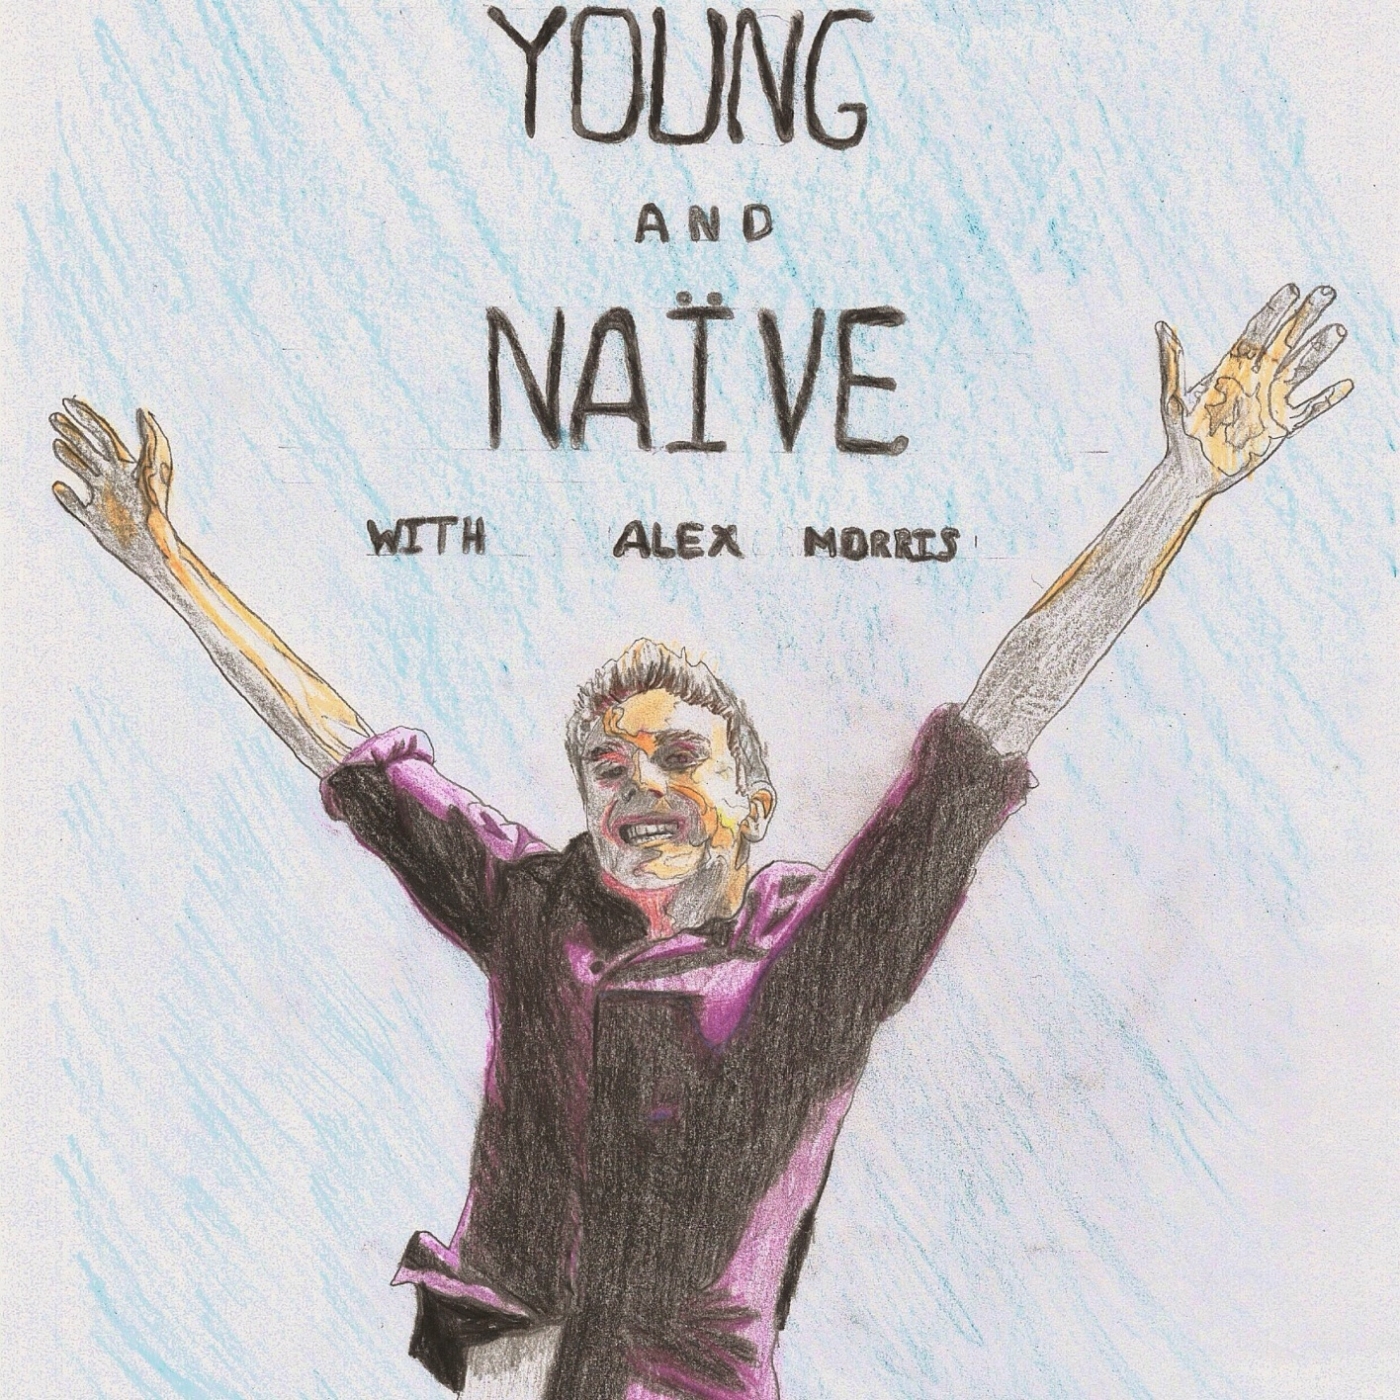 Young and Naive with Alex Morris